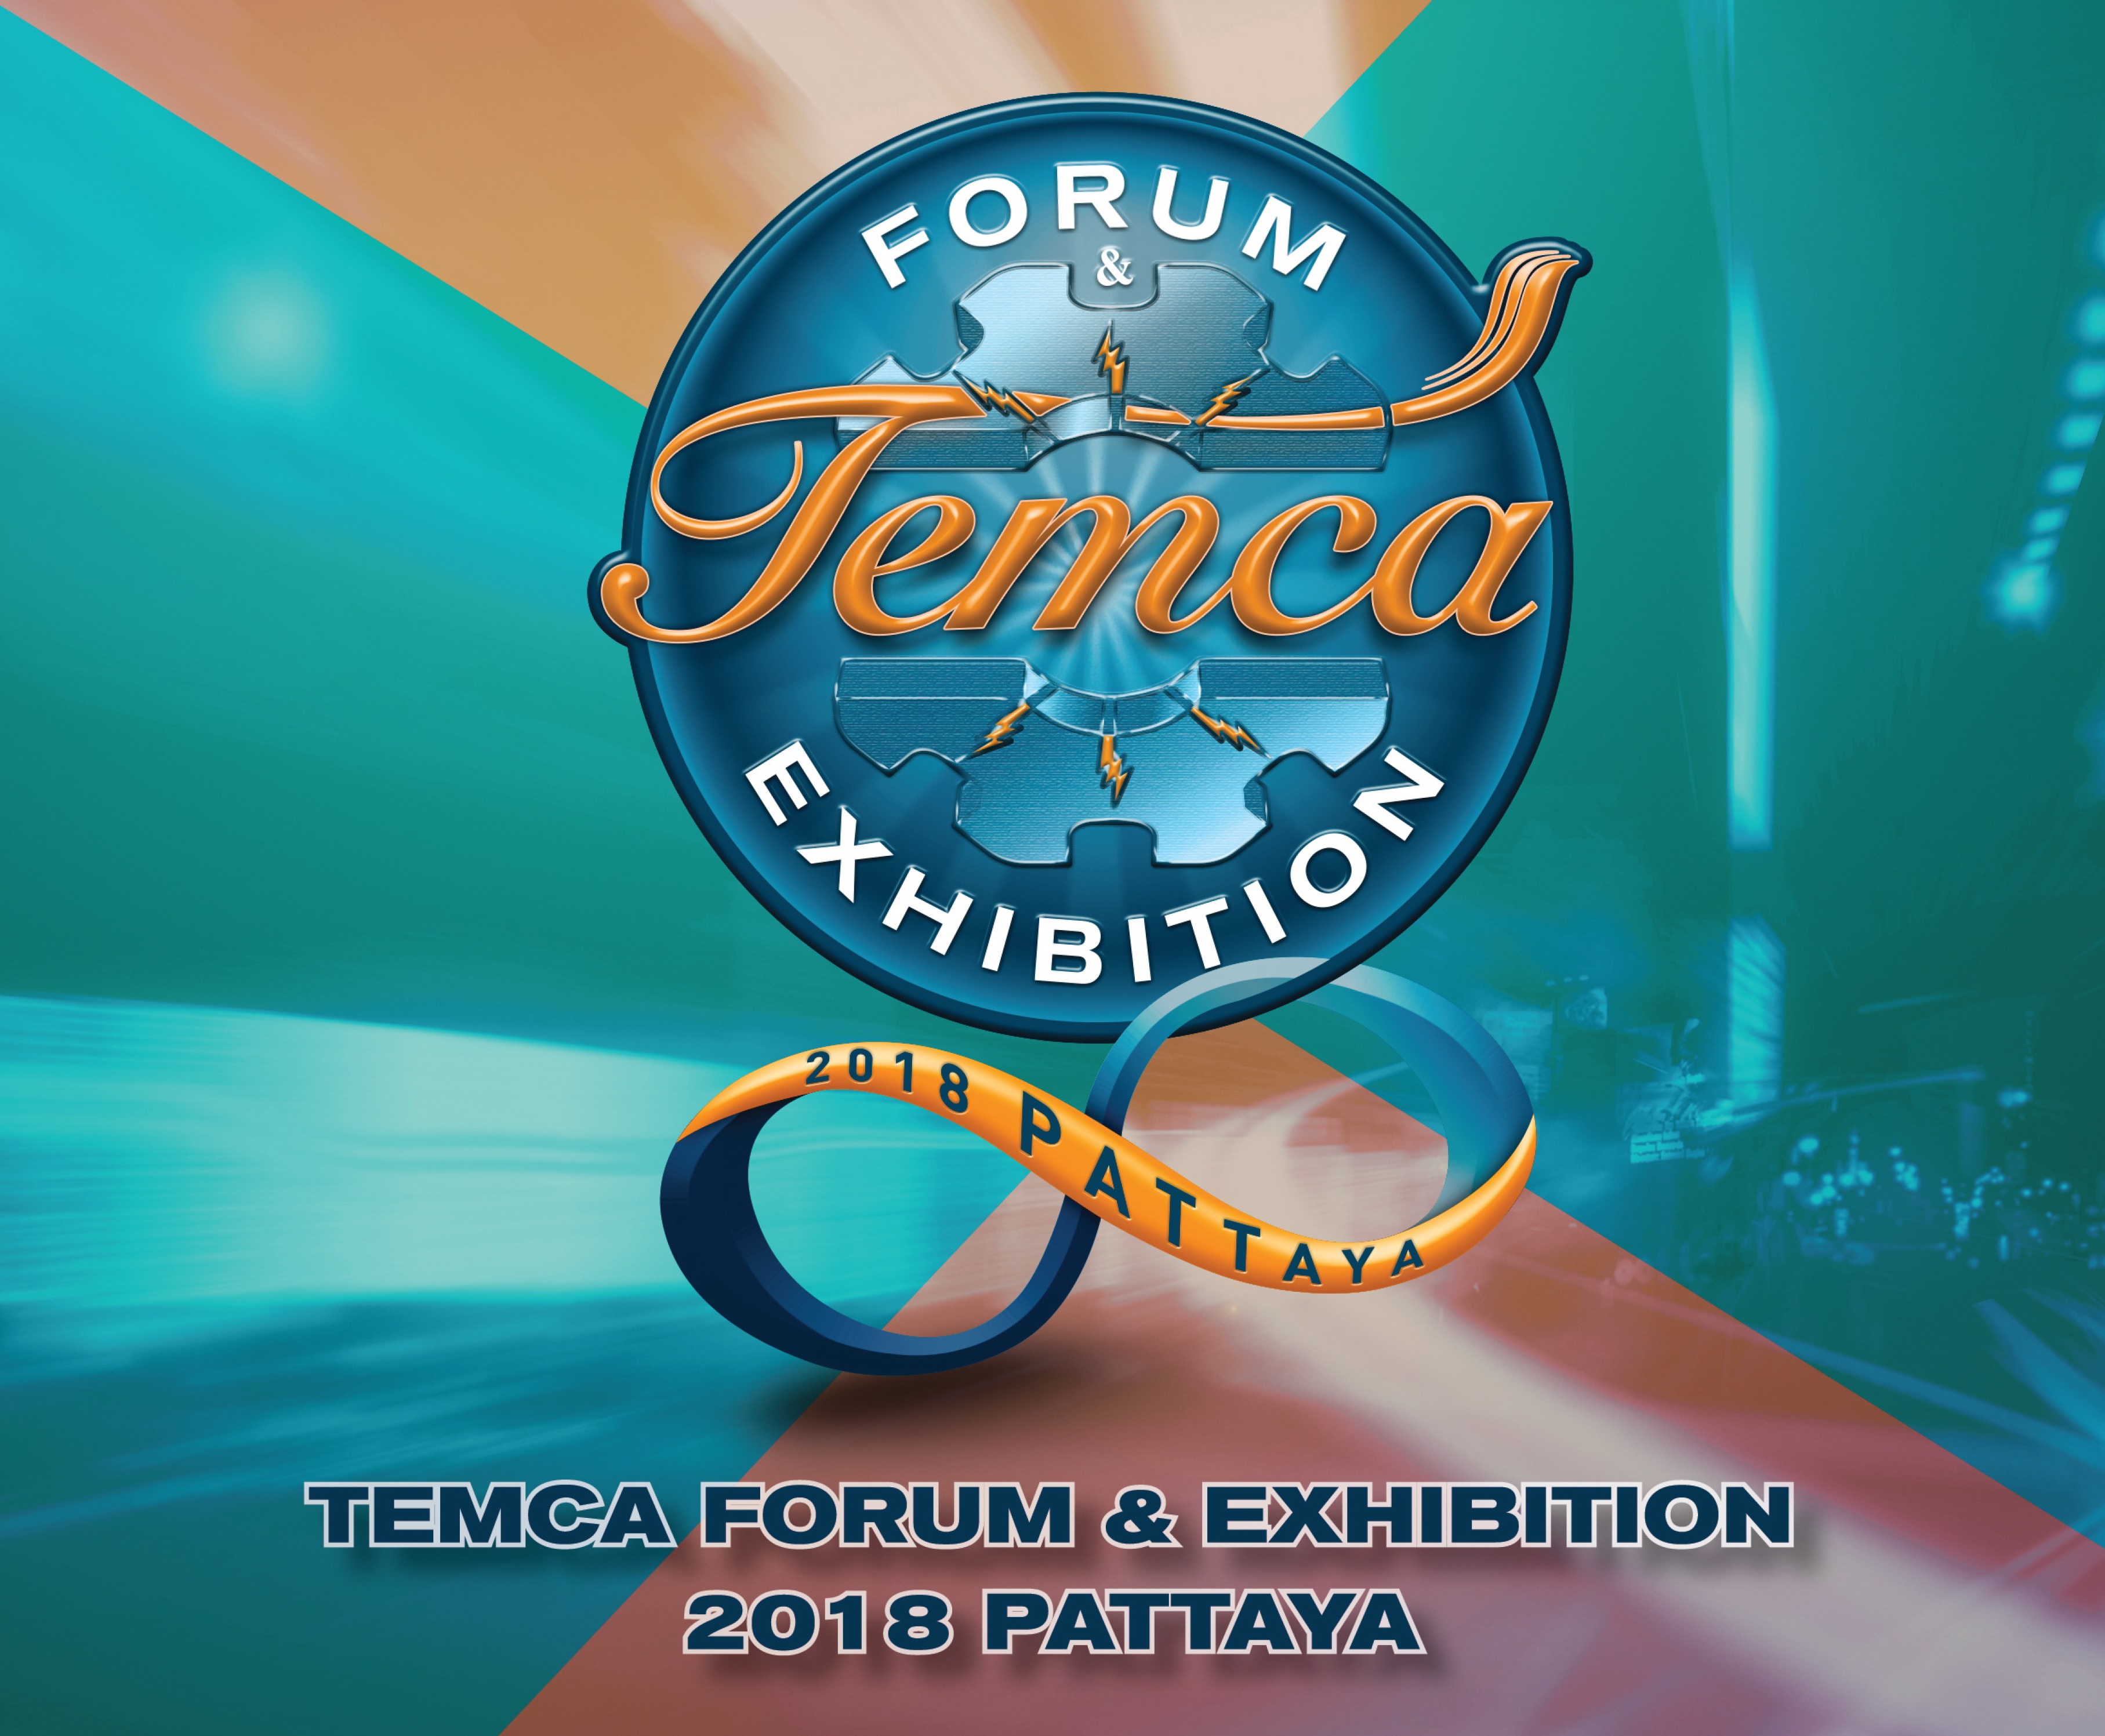 Ultraflux will join TEMCA exhibition at Royal Cliff Pattaya 17-18 August 2018